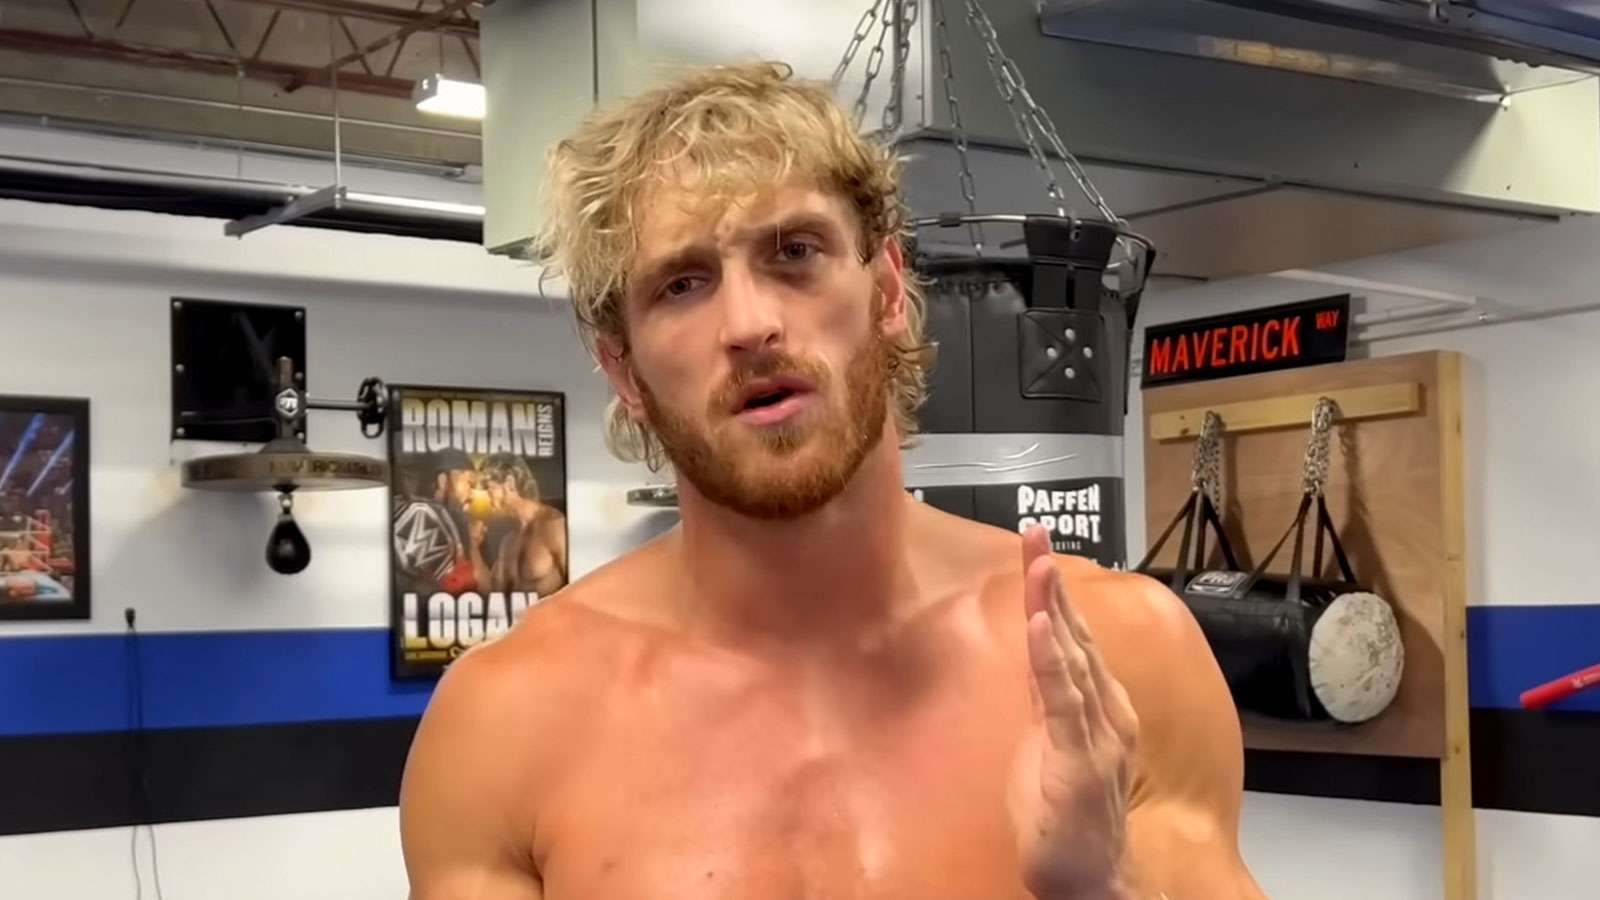 Logan Paul staring into camera in his gym